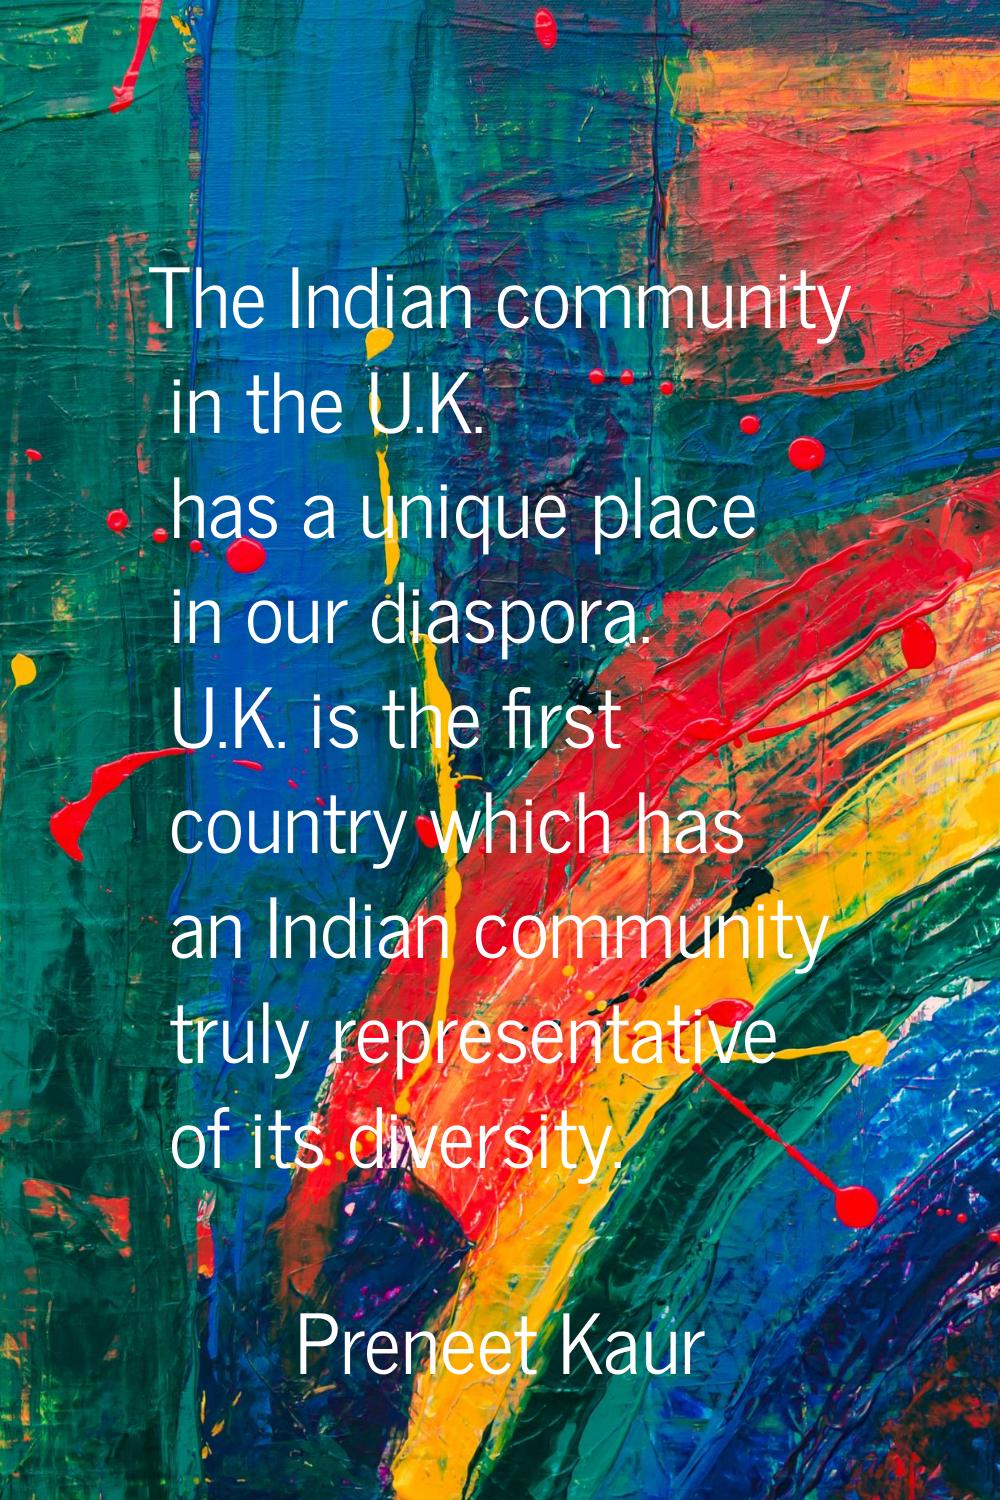 The Indian community in the U.K. has a unique place in our diaspora. U.K. is the first country whic